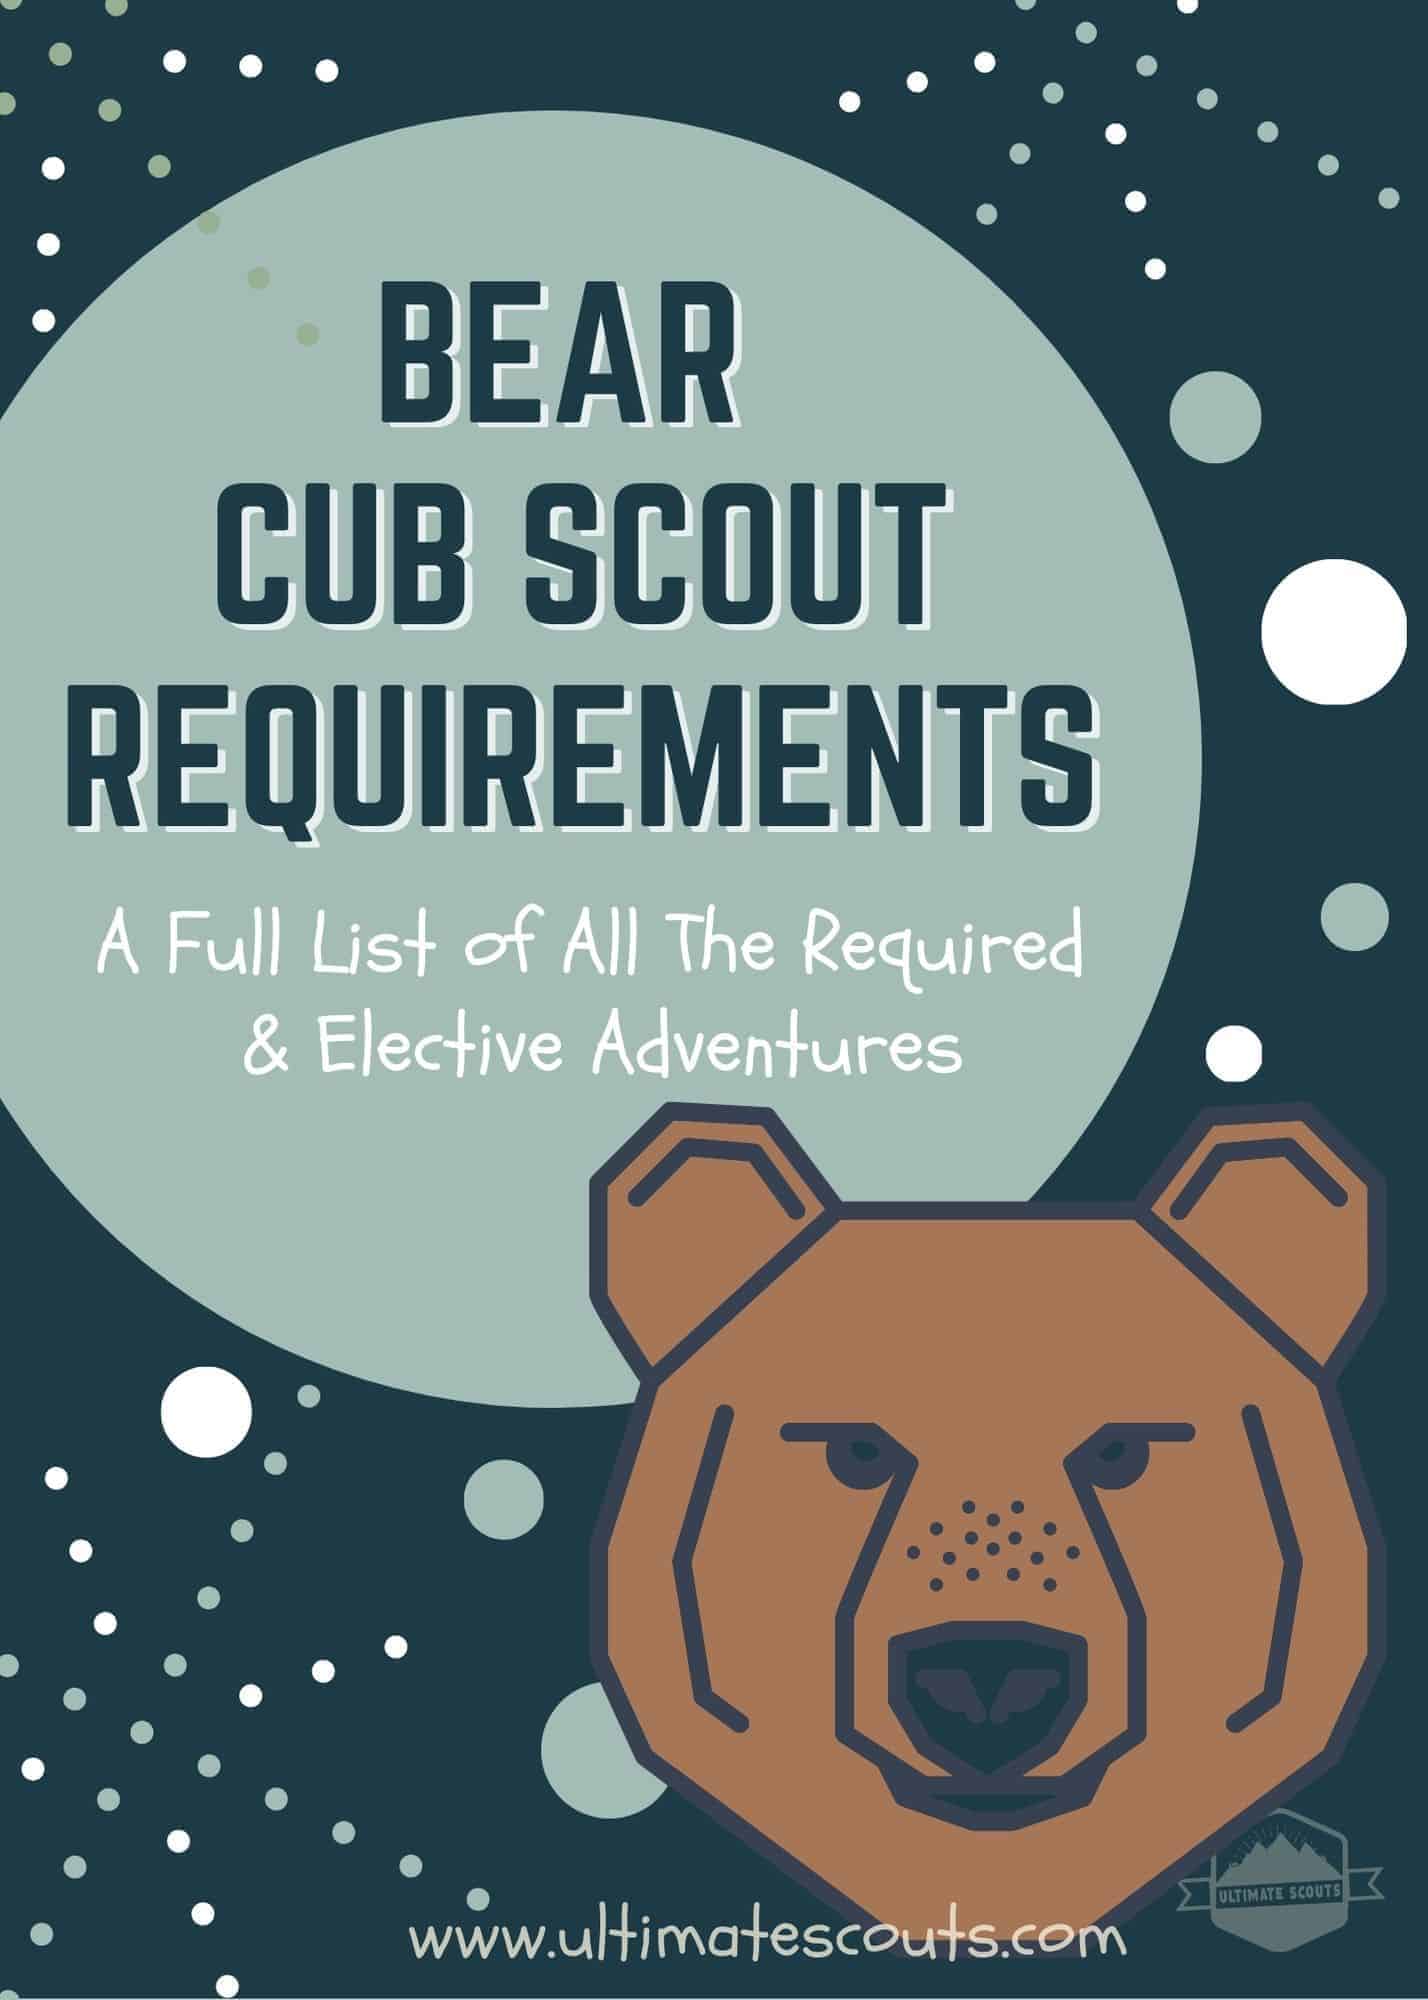 What Are The Cub Scouts Bear Requirements?